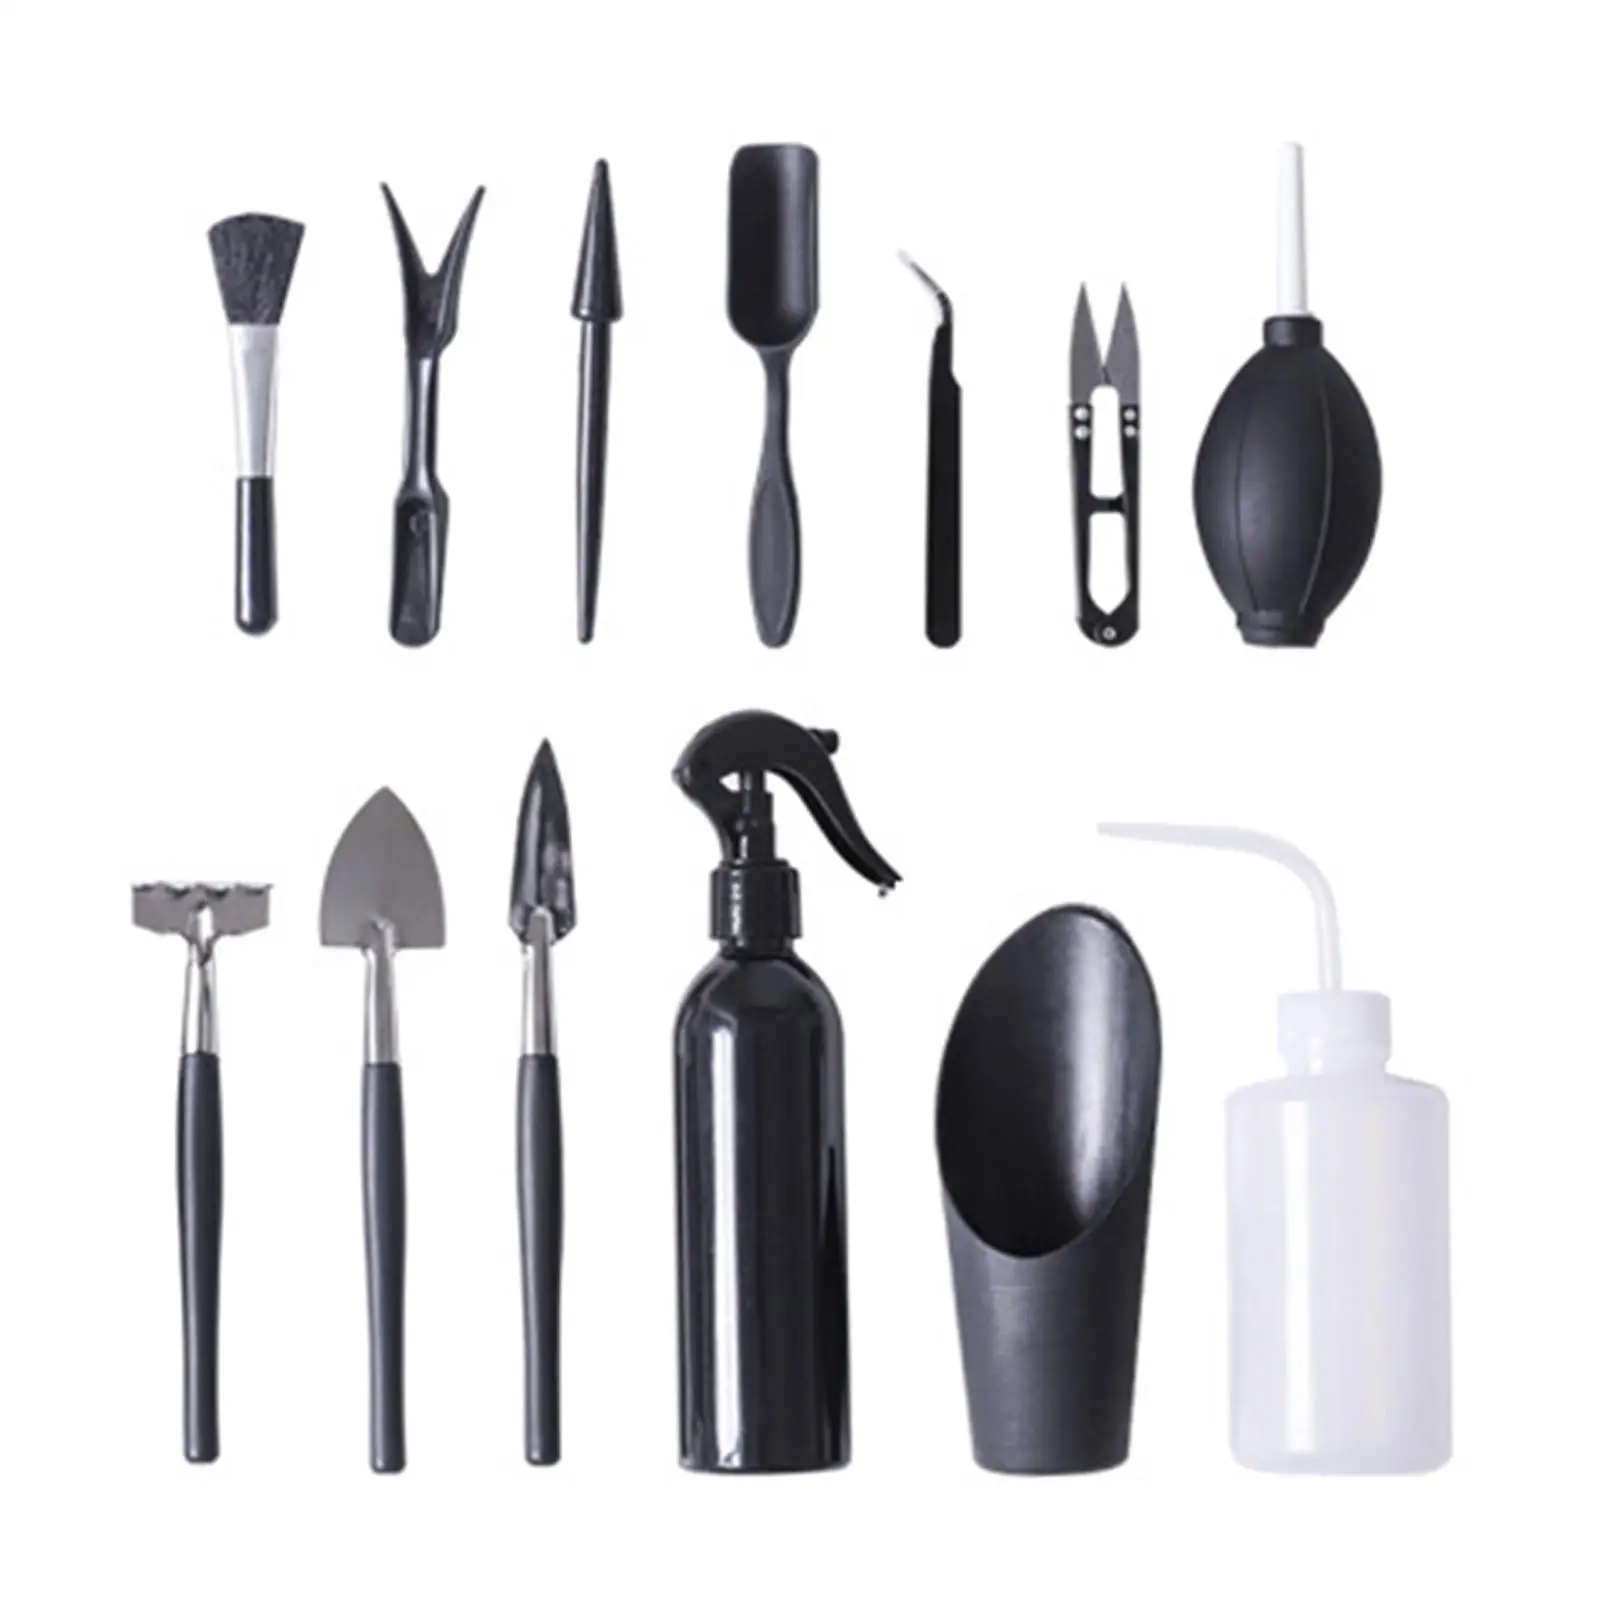 Hand Transplanting Tools Kit 13 Pieces for , Houseplant, Bonsai Tools Stainless Steel, PP Materials Easy to Carry Accessory